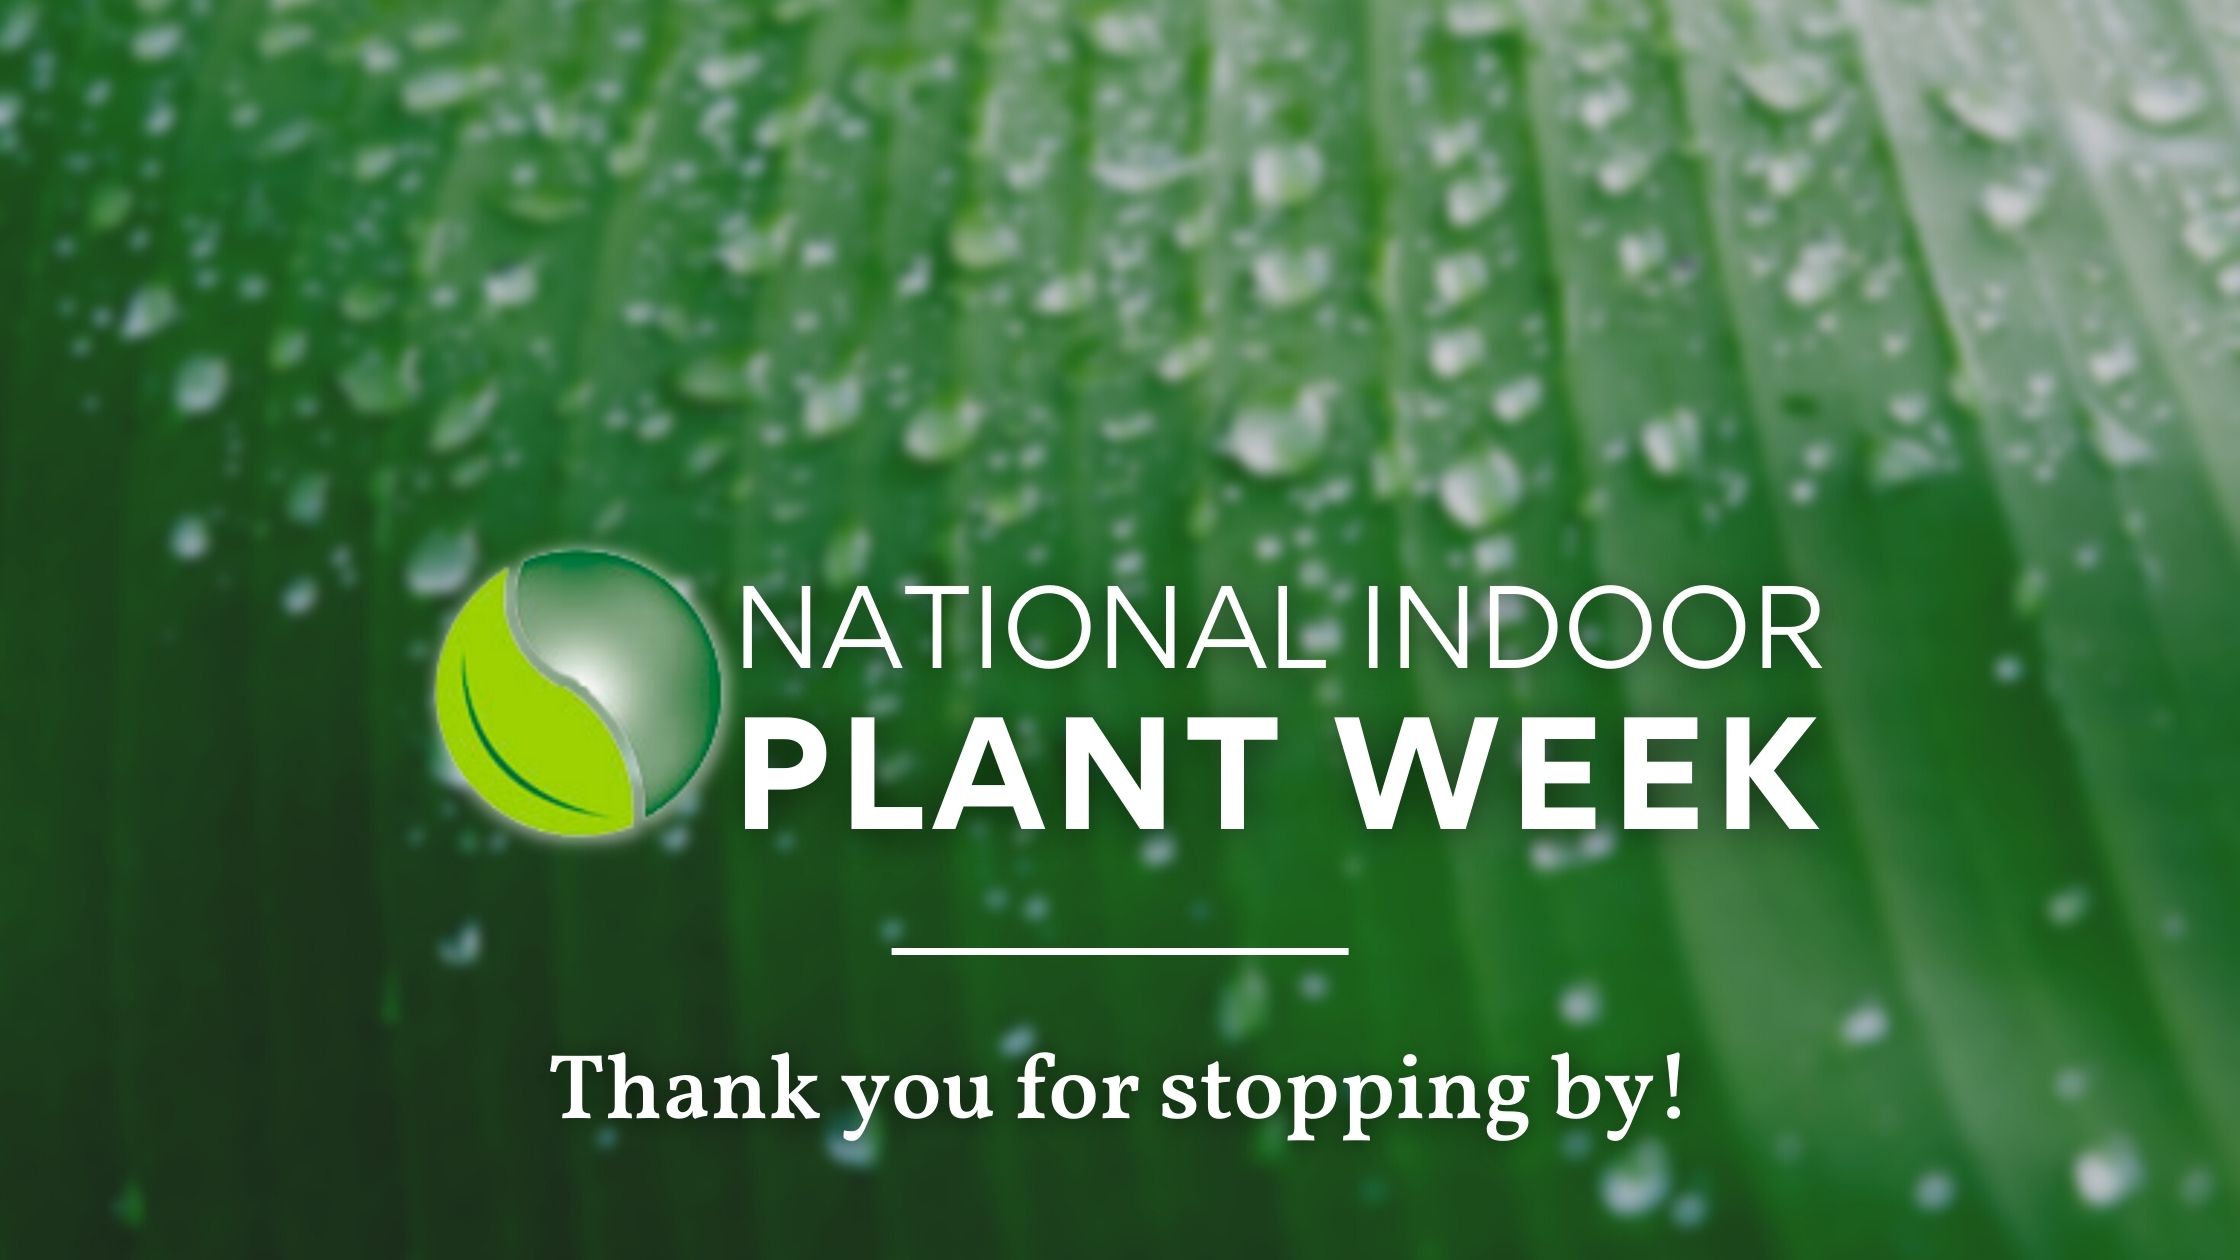 National Indoor Plant Week Full Width Cityscapes